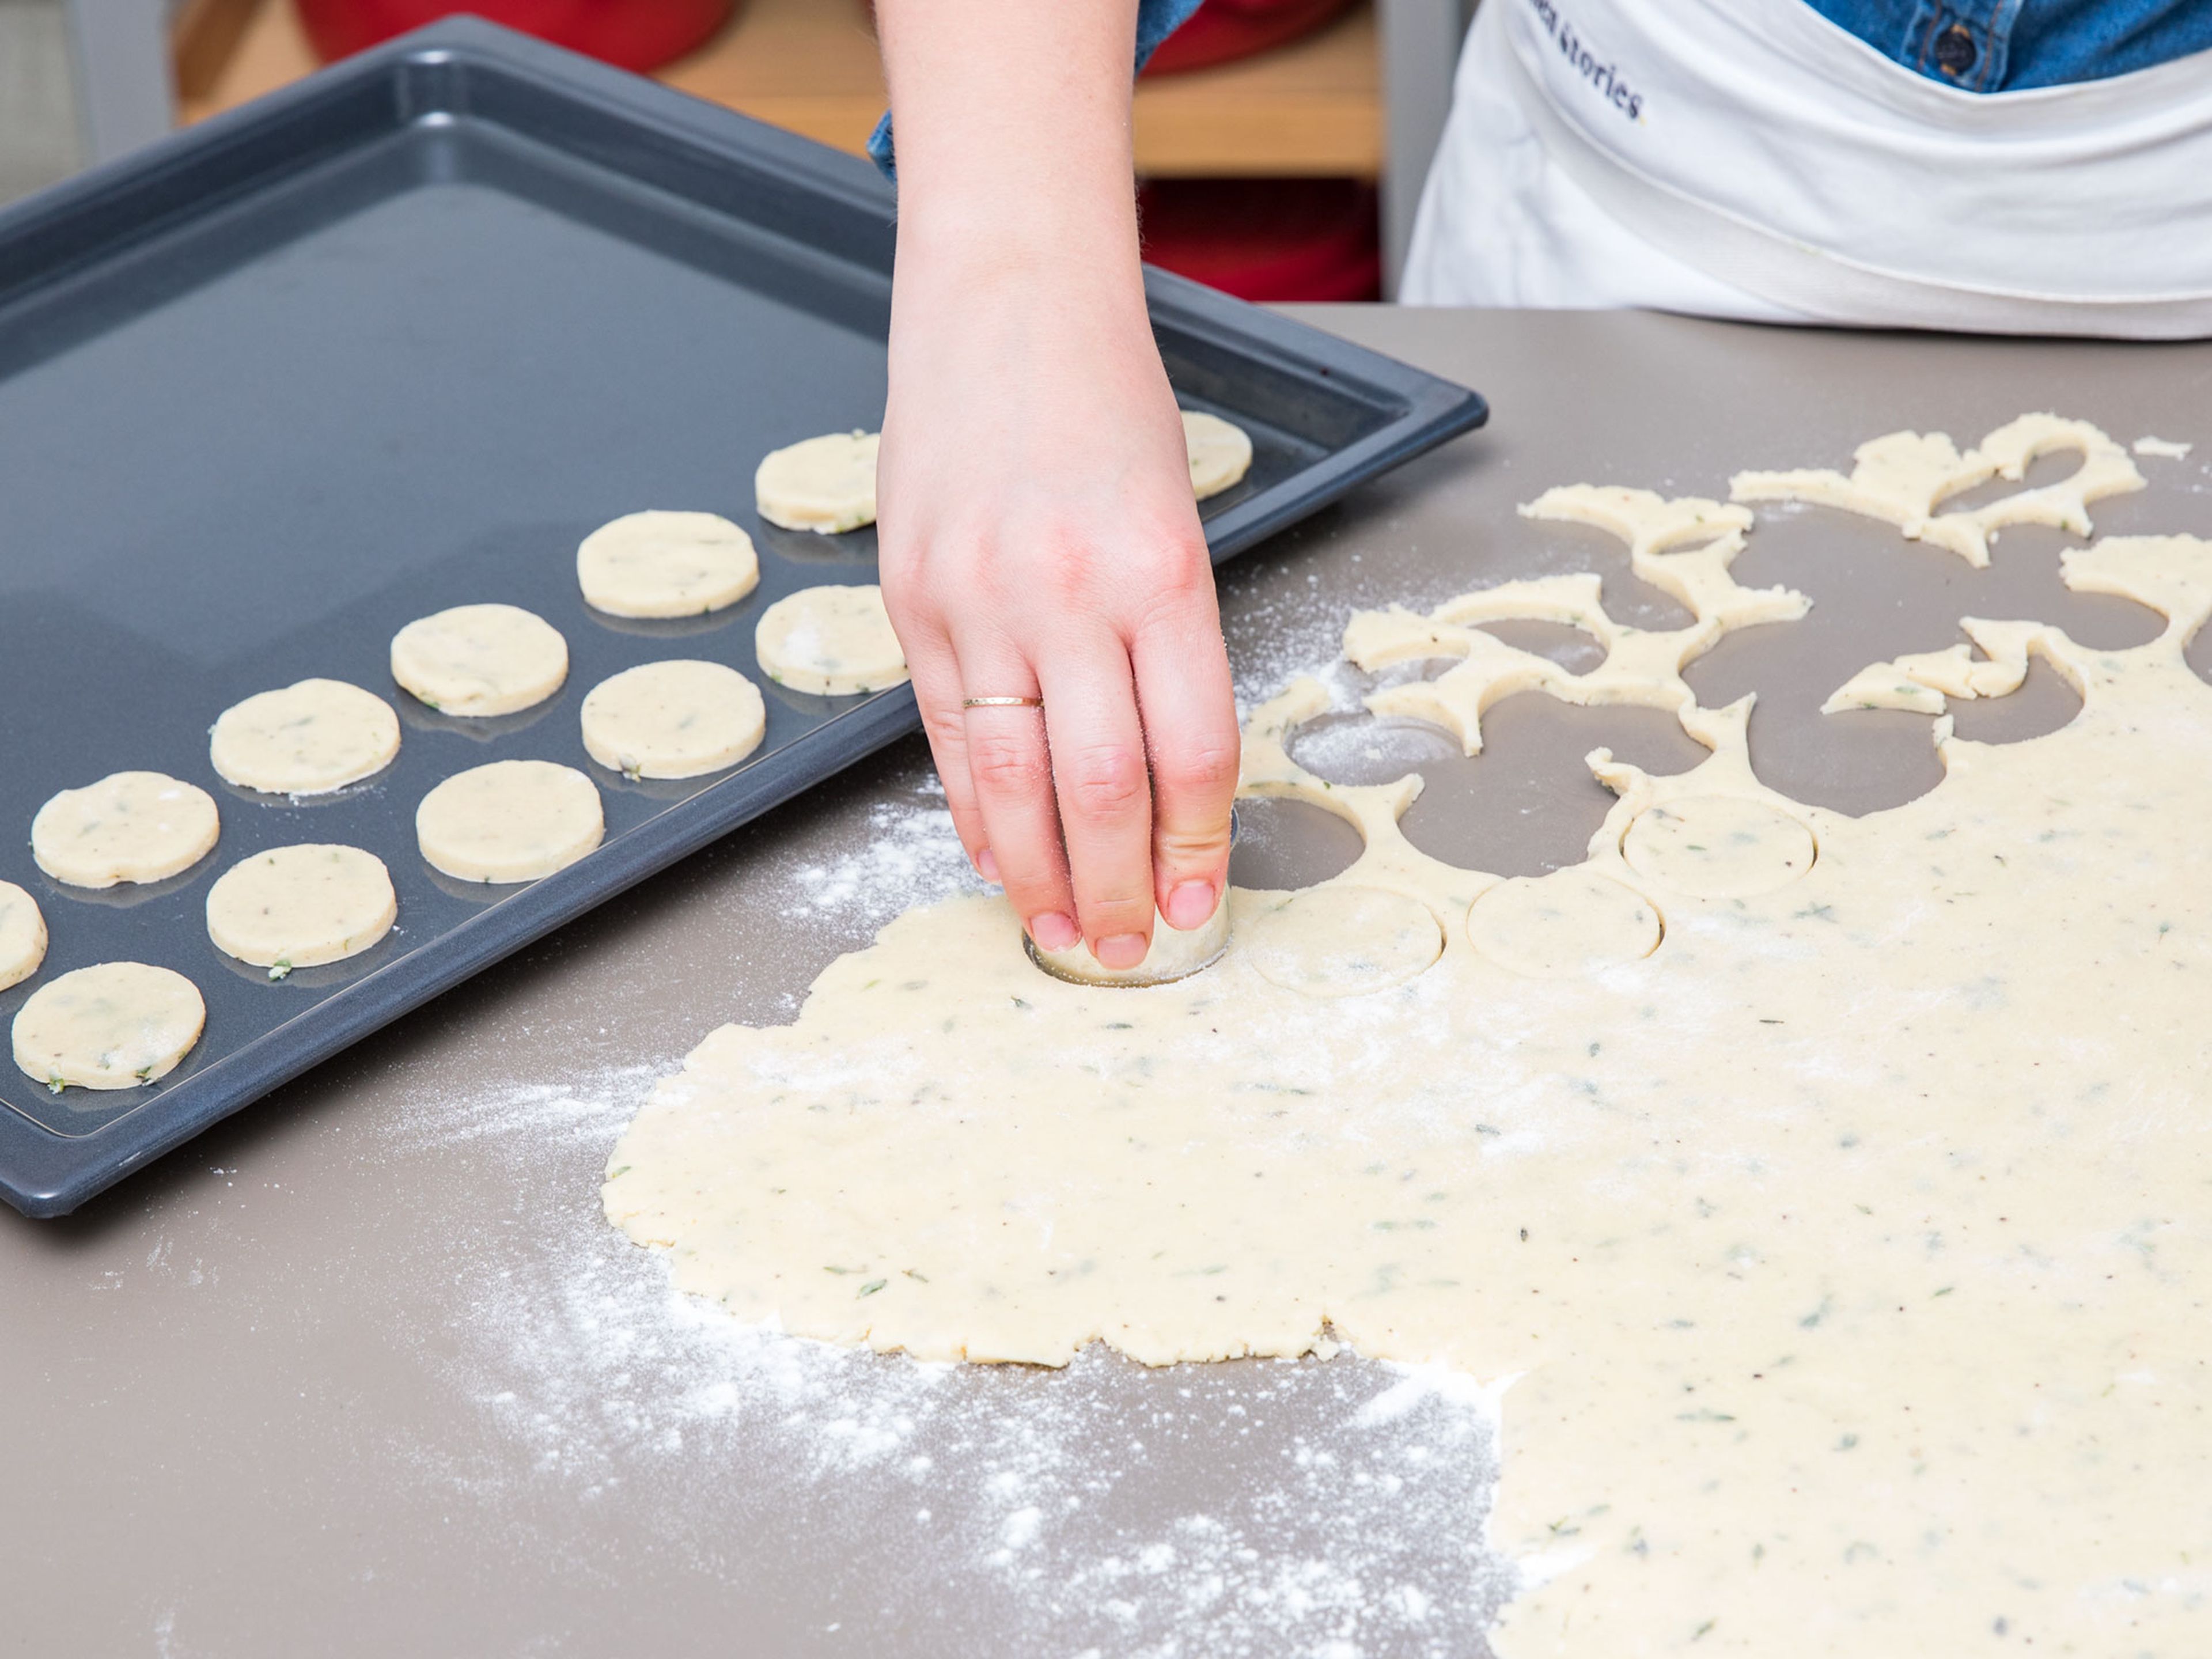 Flour a working surface and roll out the cooled dough, approx. 0.5-cm/0.2-in. thick. Use a cookie cutter to cut out circles to desired size. Transfer them onto a parchment-lined baking sheet.